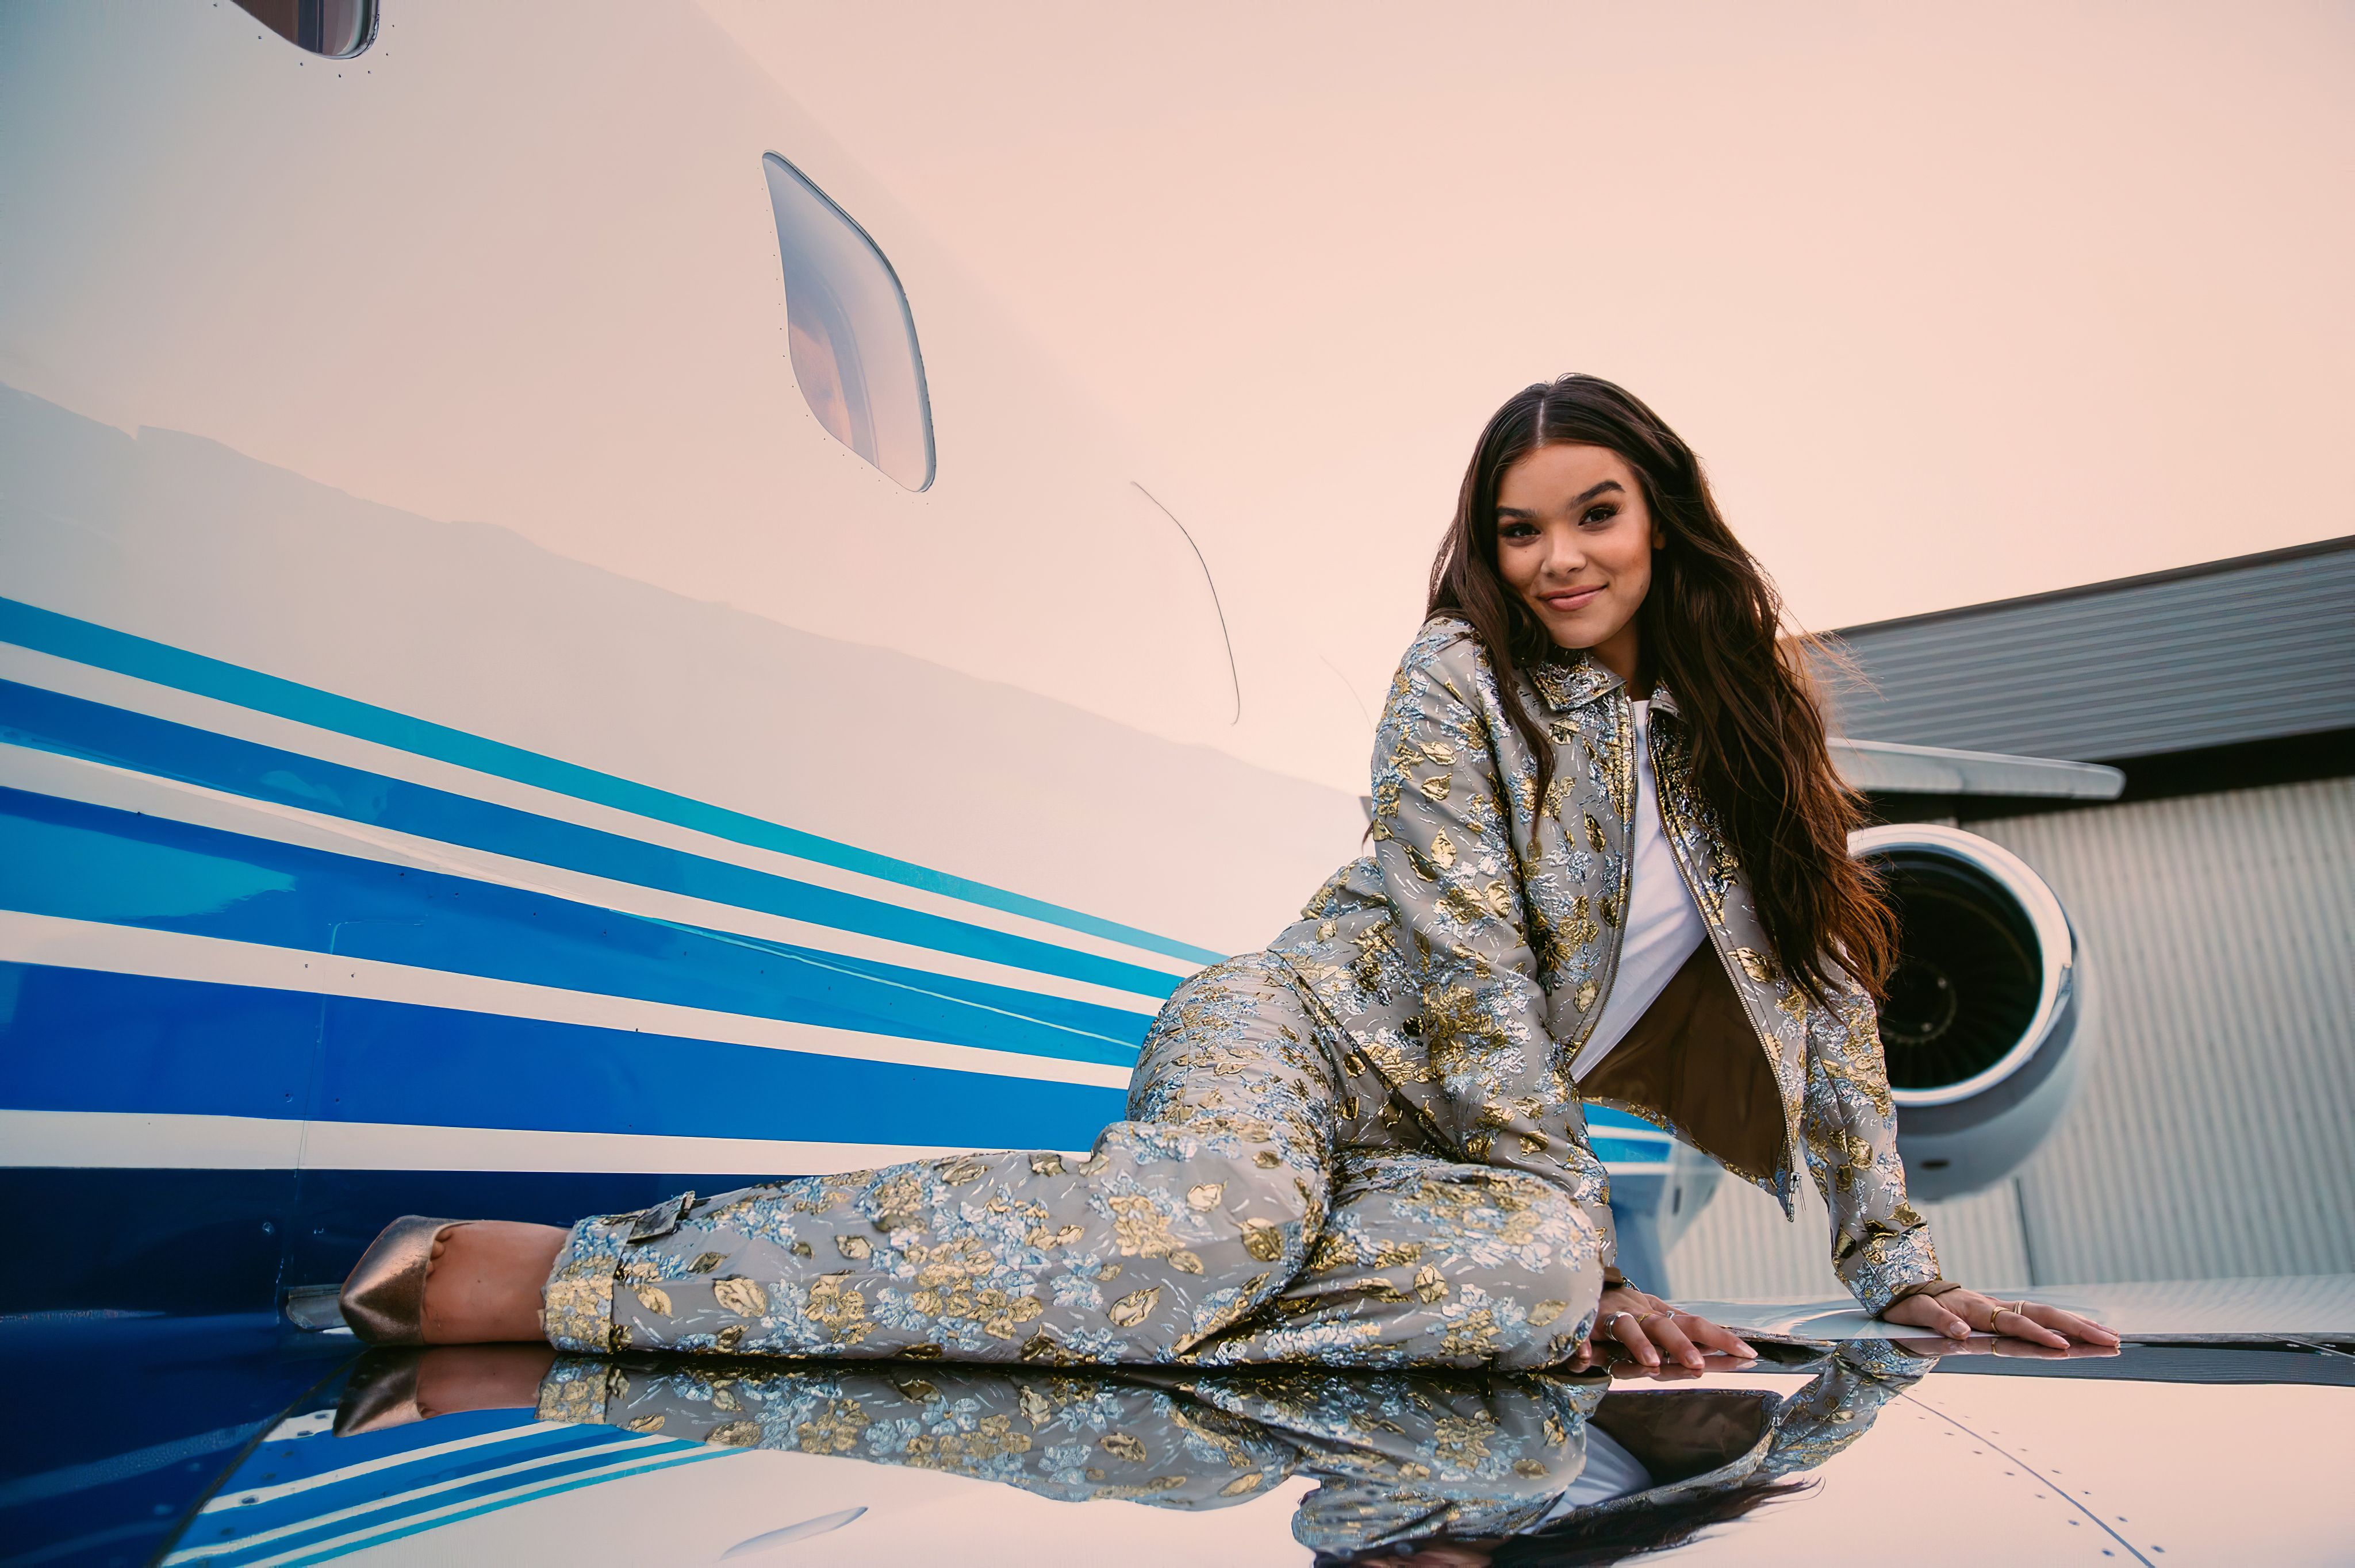 People 4096x2728 celebrity Hailee Steinfeld women aircraft vehicle actress singer smiling women outdoors private jet brunette women with planes